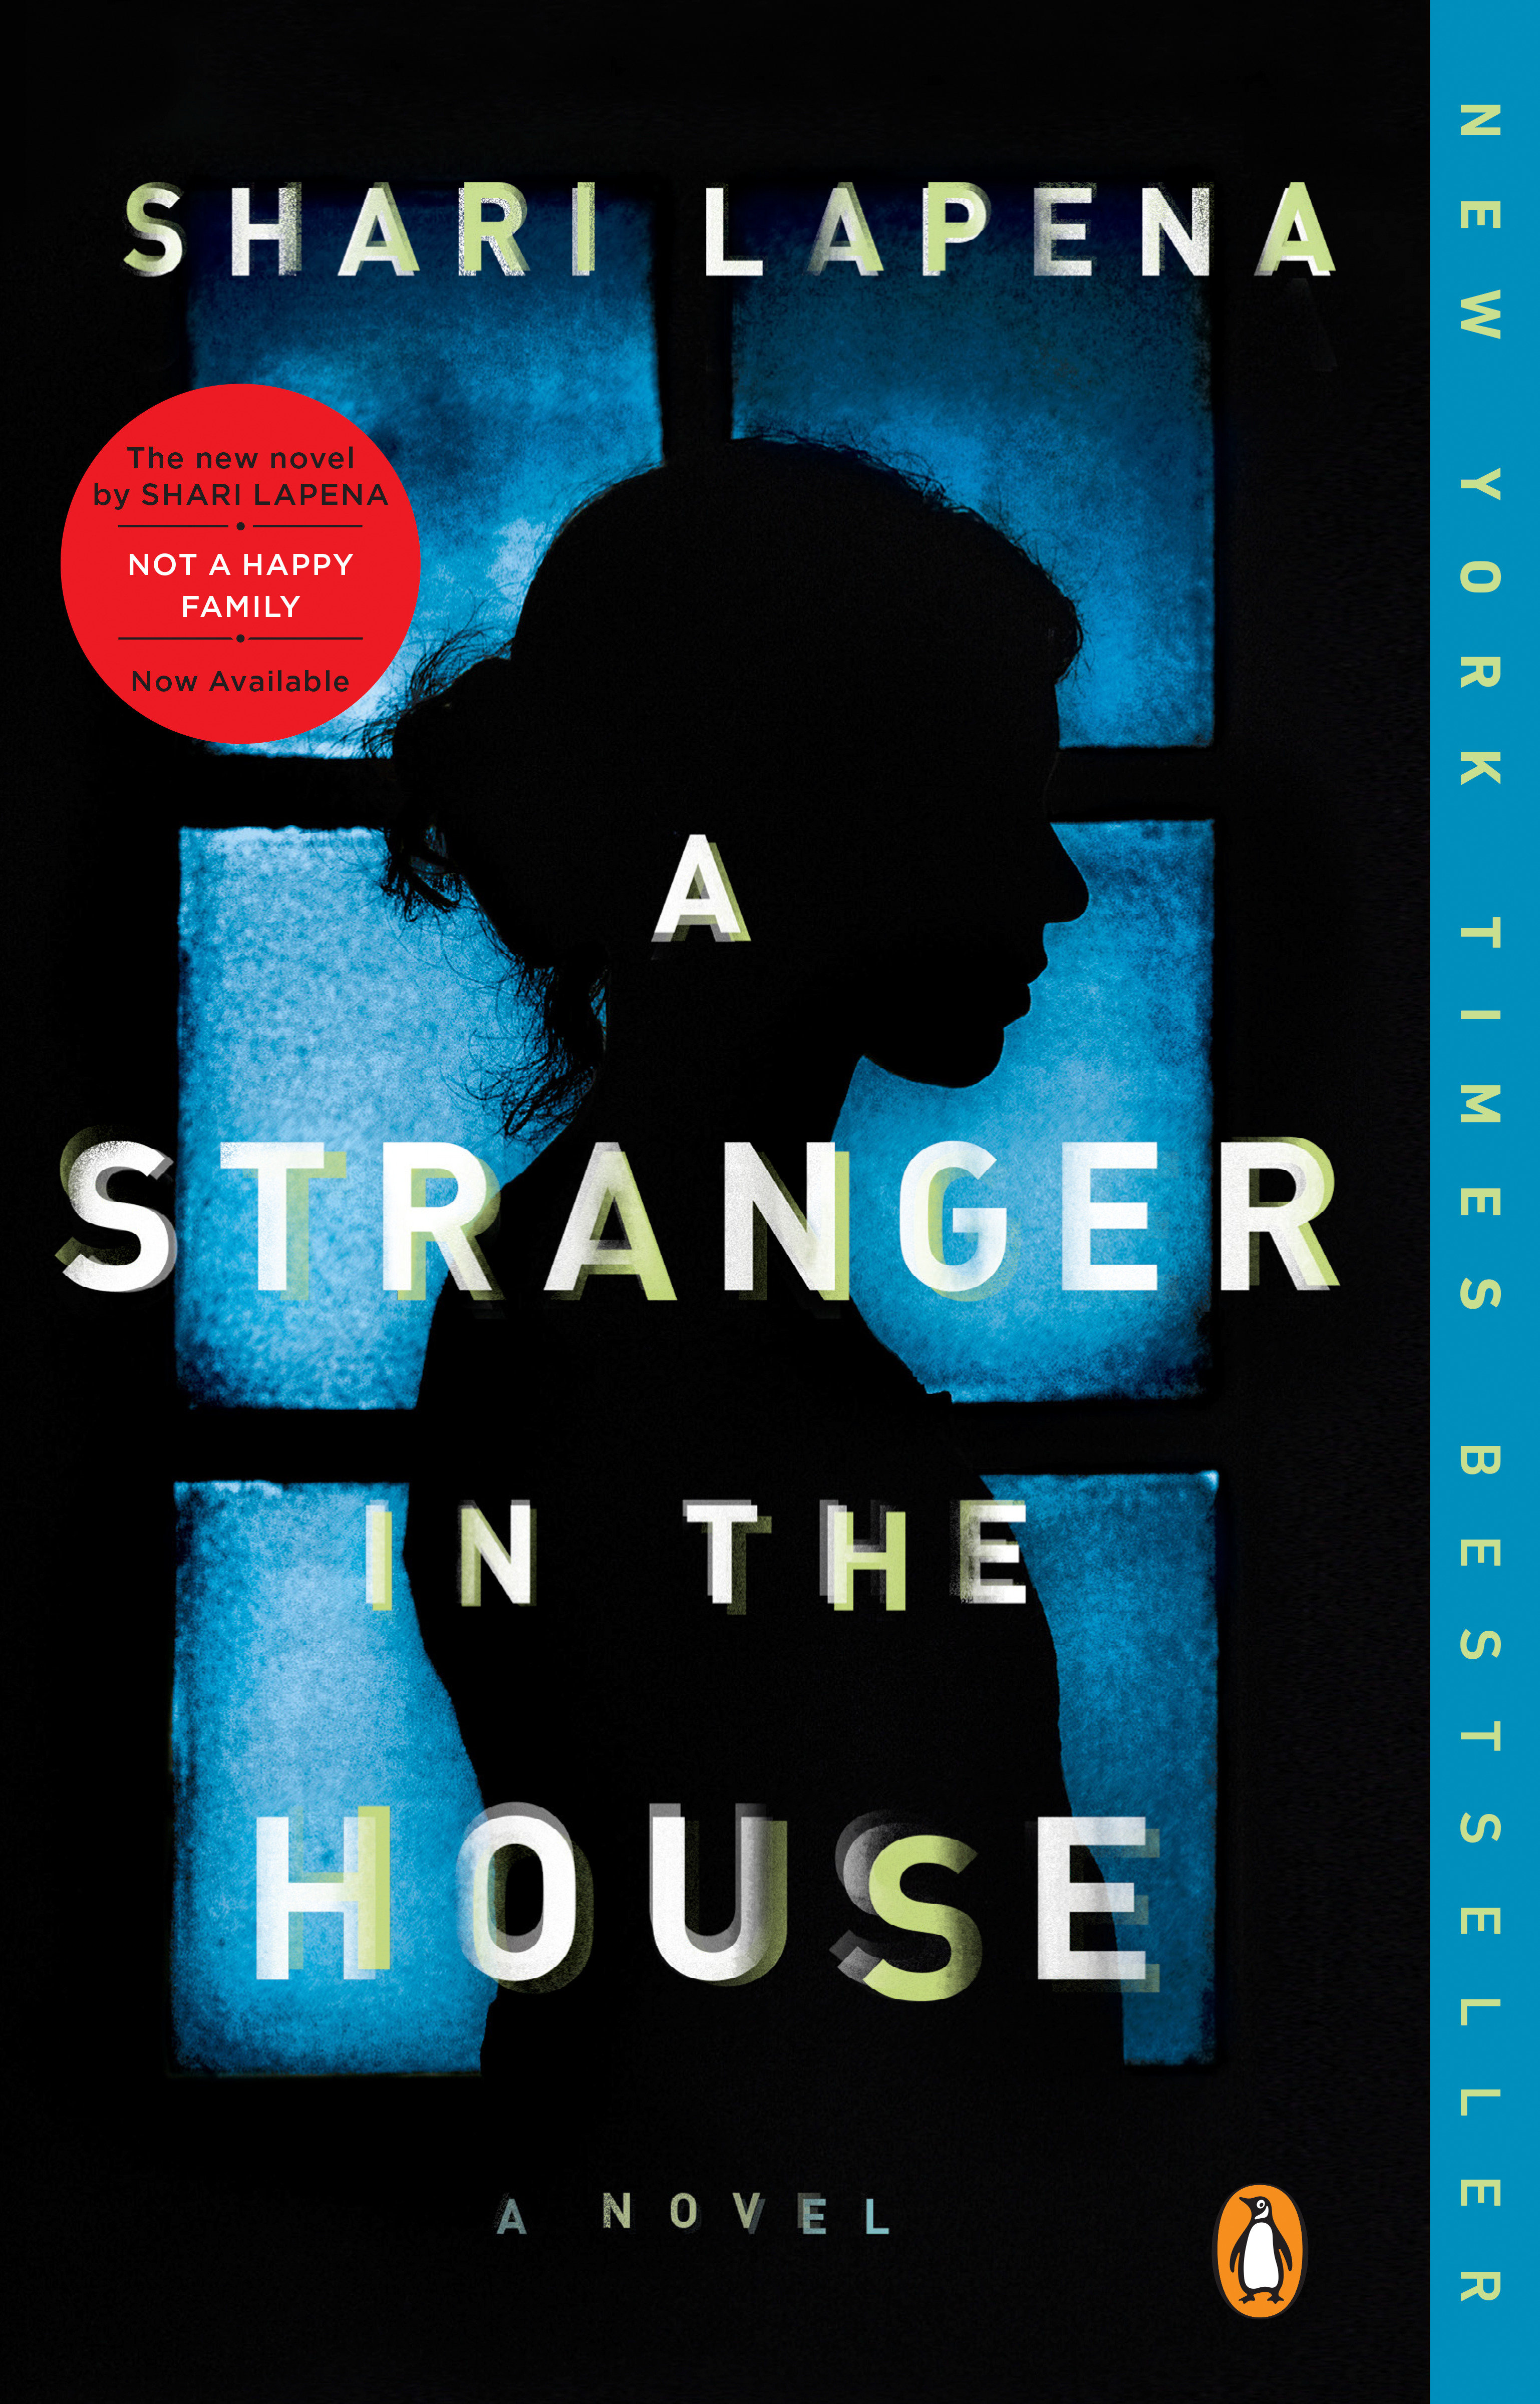 A stranger in the house cover image